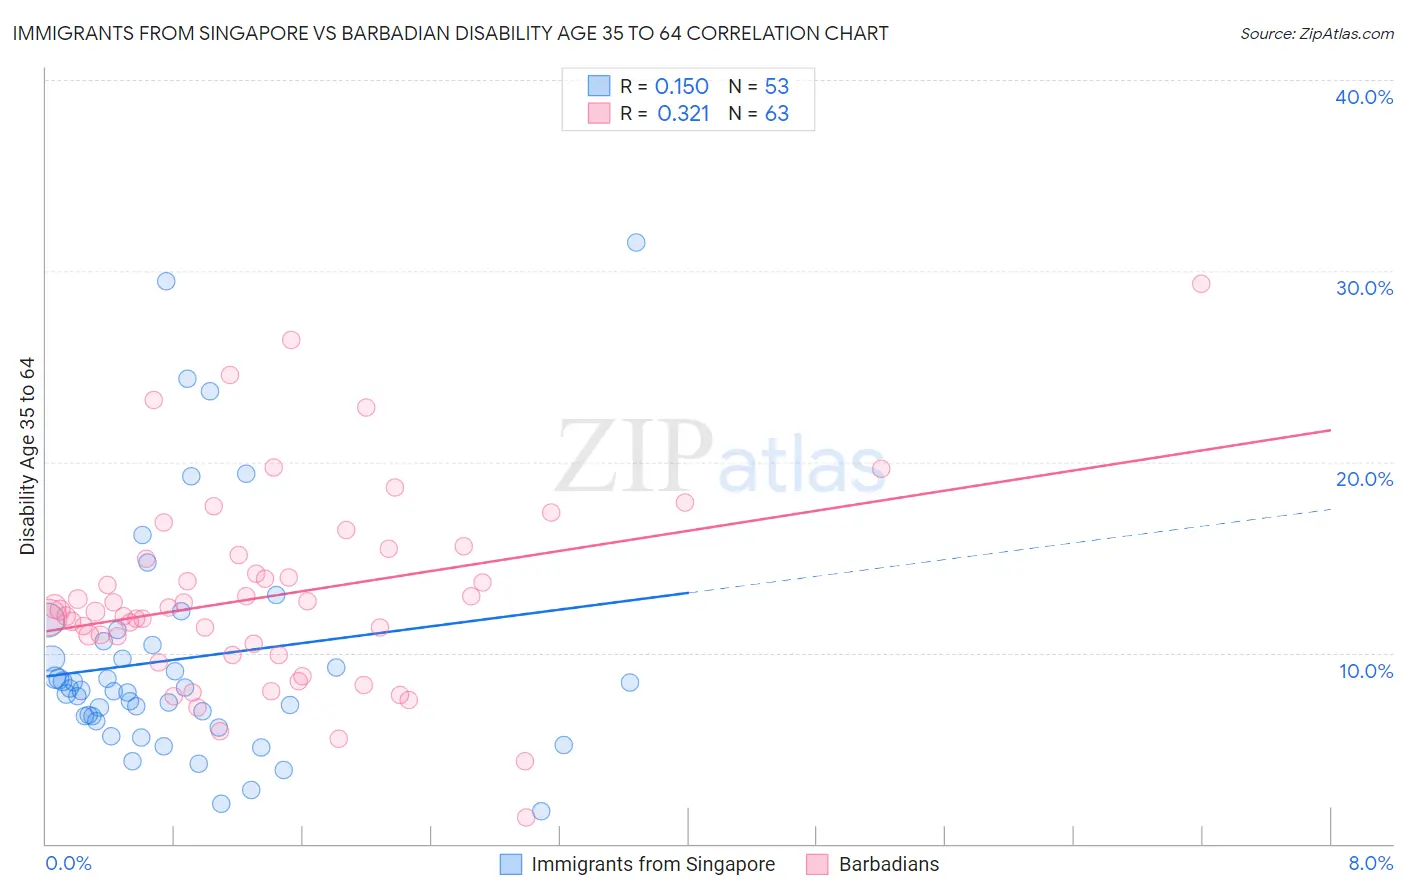 Immigrants from Singapore vs Barbadian Disability Age 35 to 64